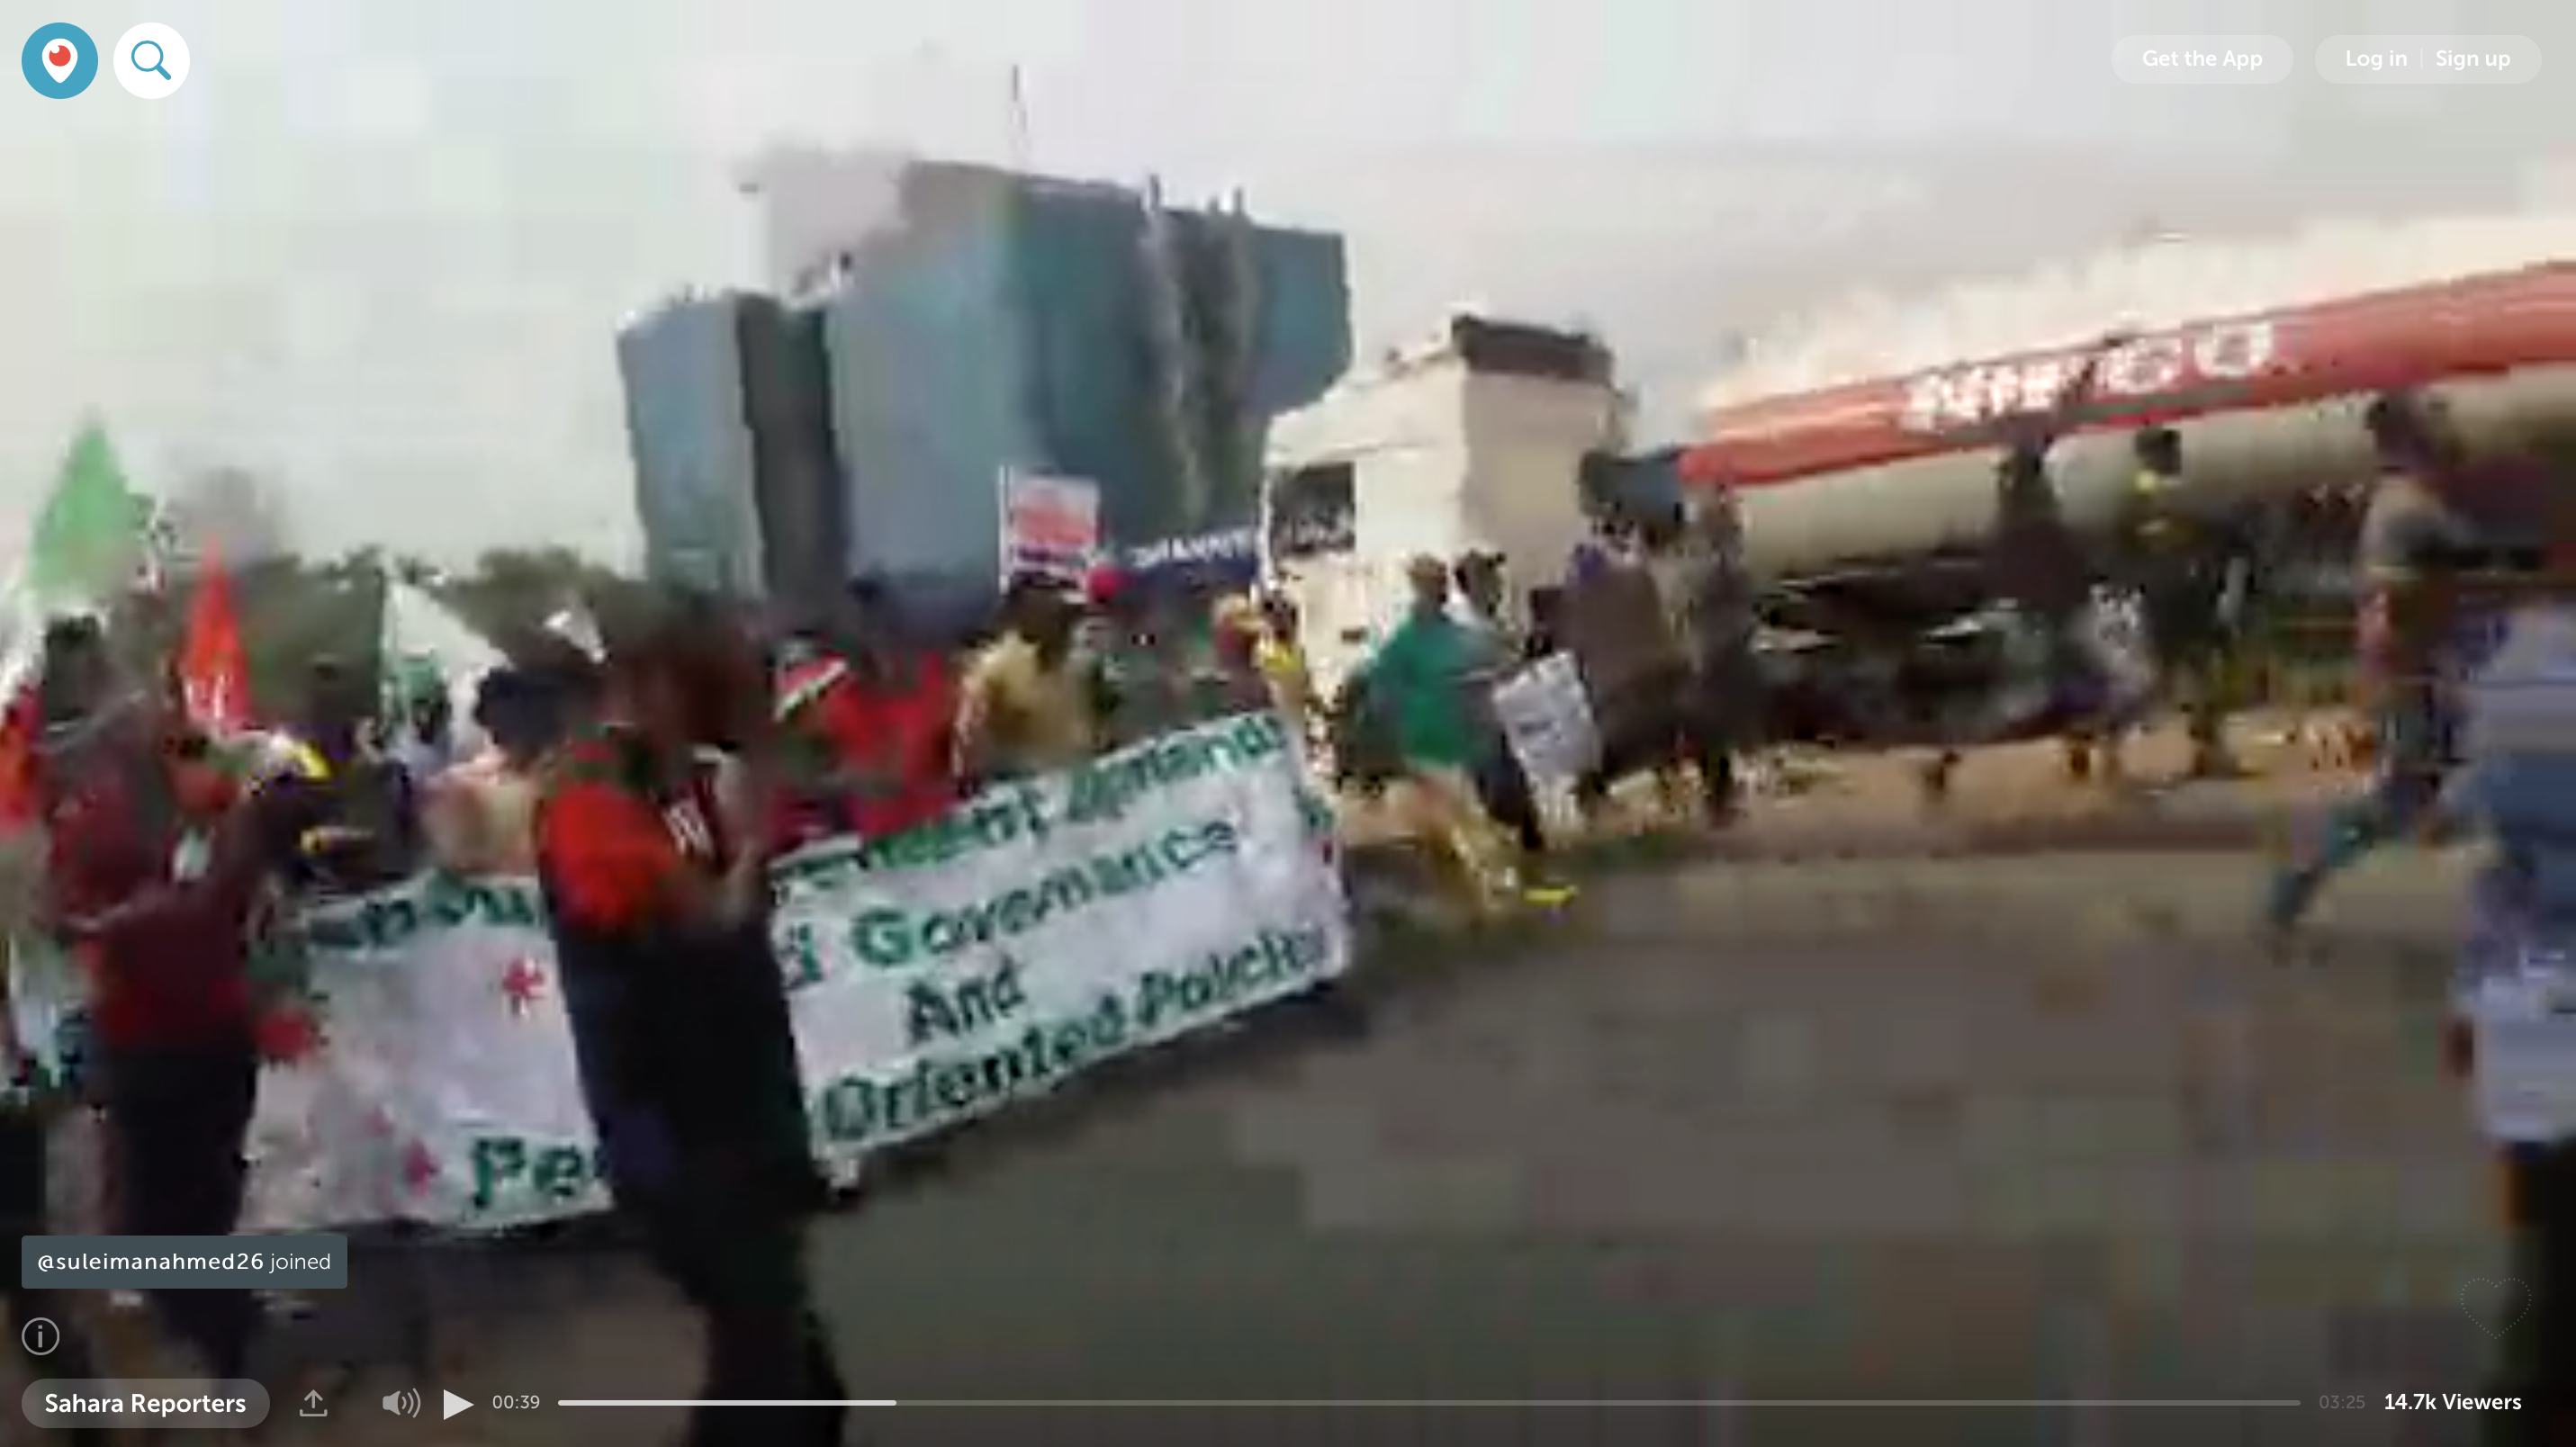 South Africa deploys troops at State of the Nation / Protesters in Lagos, Nigeria